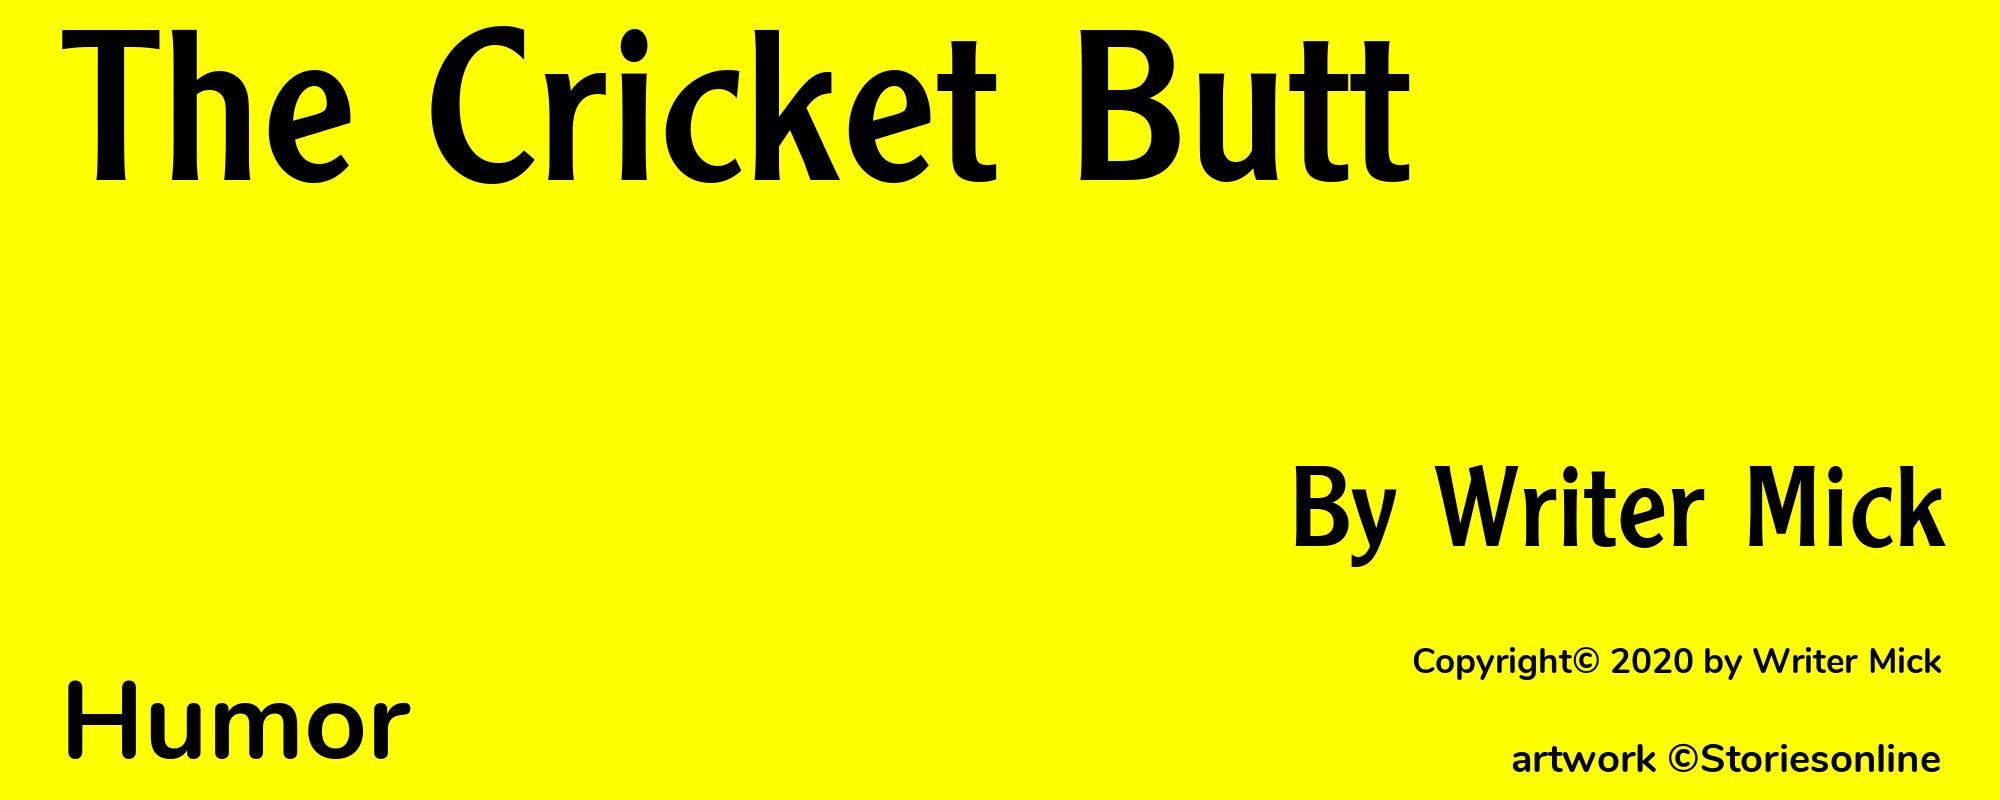 The Cricket Butt - Cover